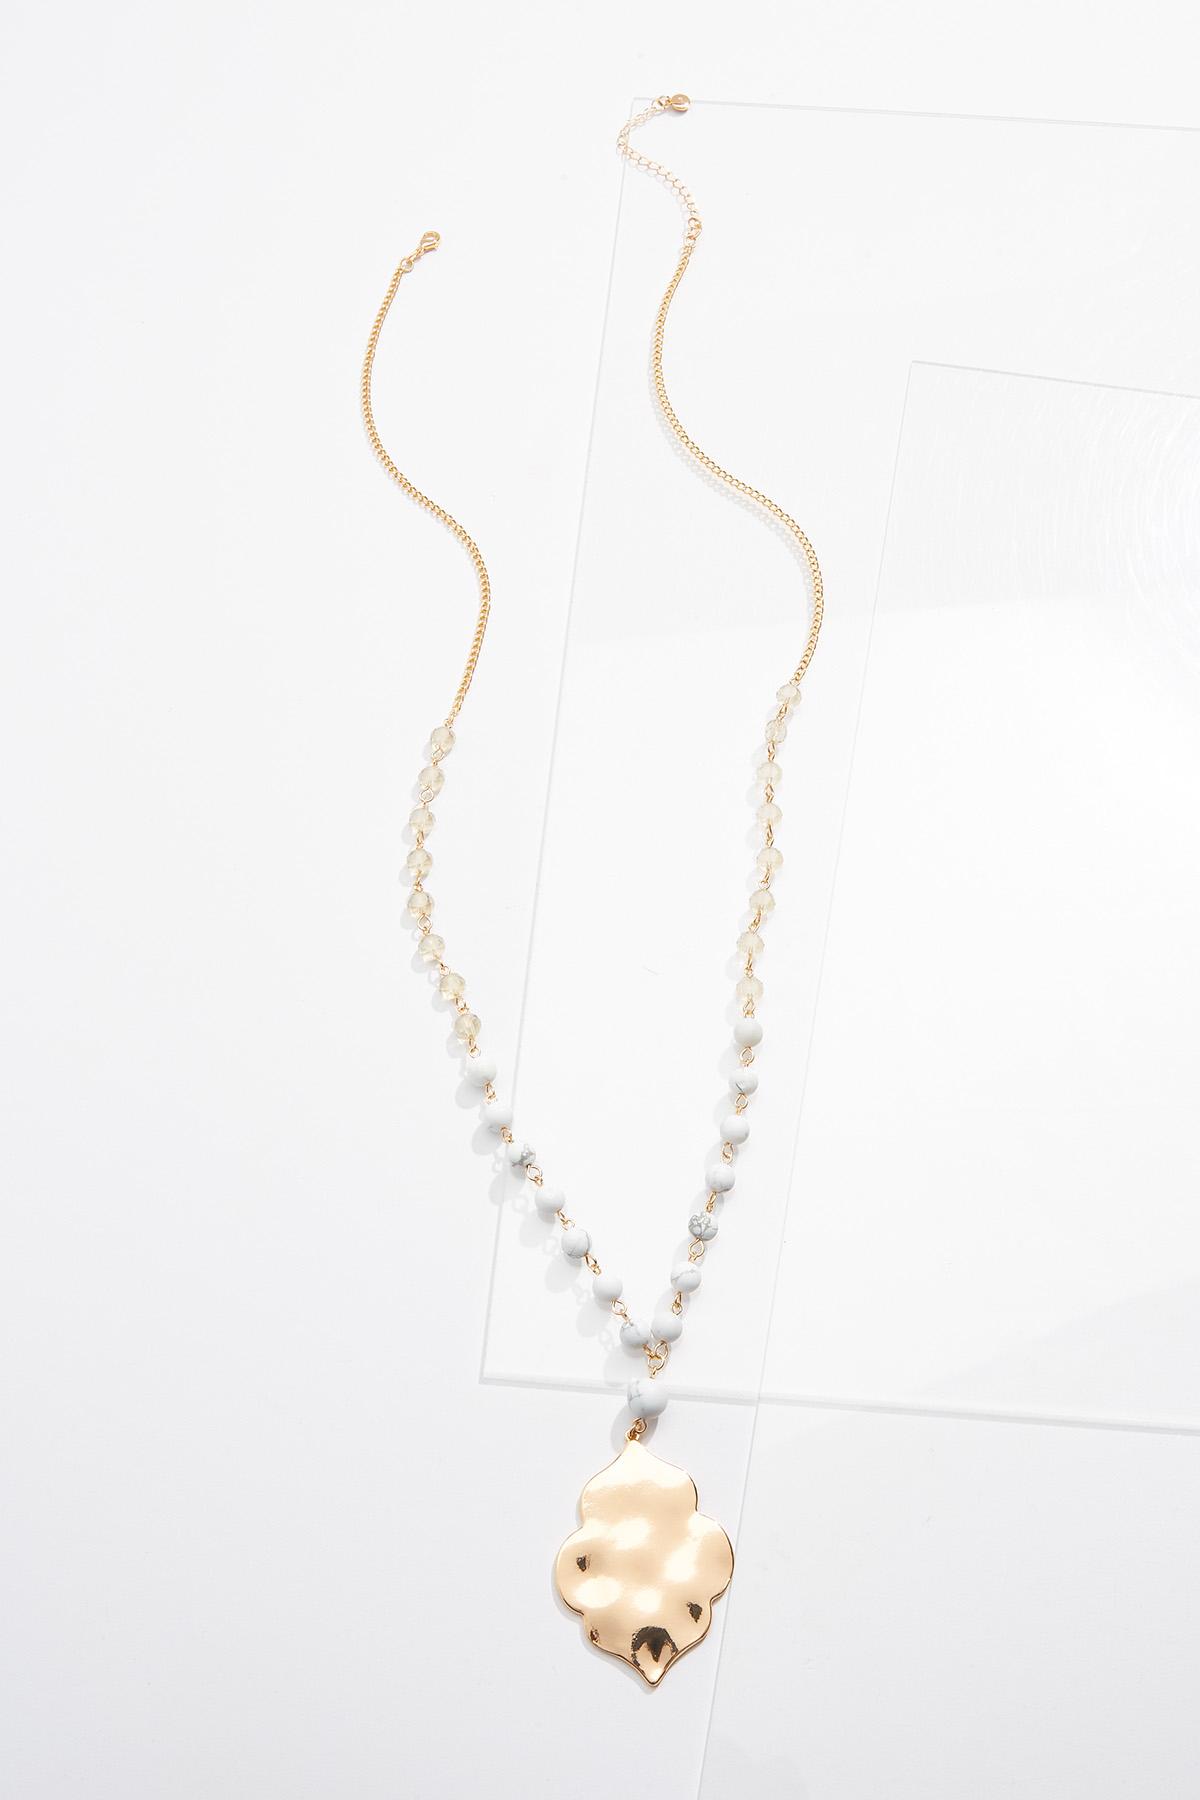 Gold Pendant Beaded Necklace